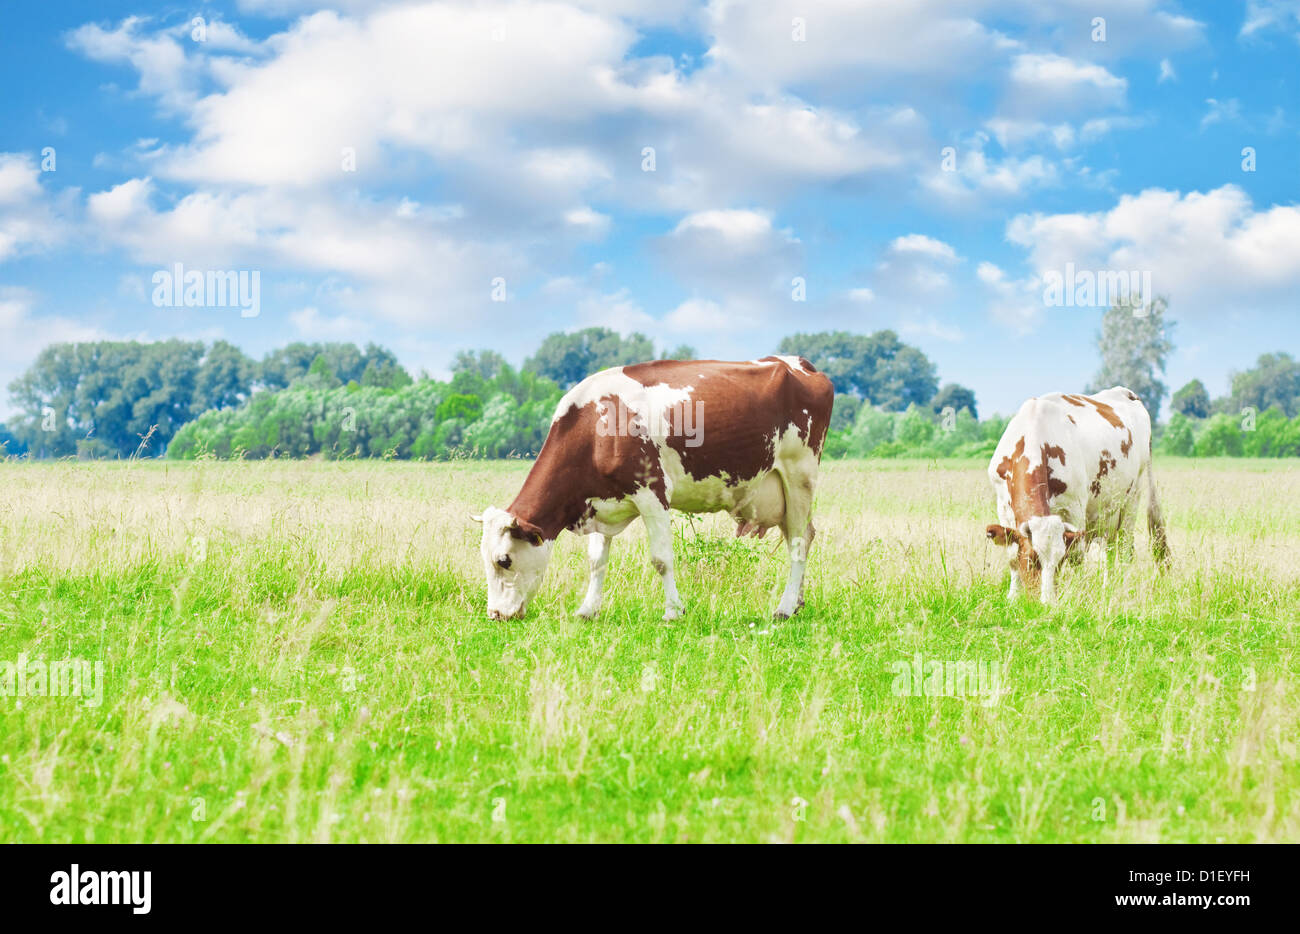 Cows grazing on meadow under blue cloudy sky Stock Photo